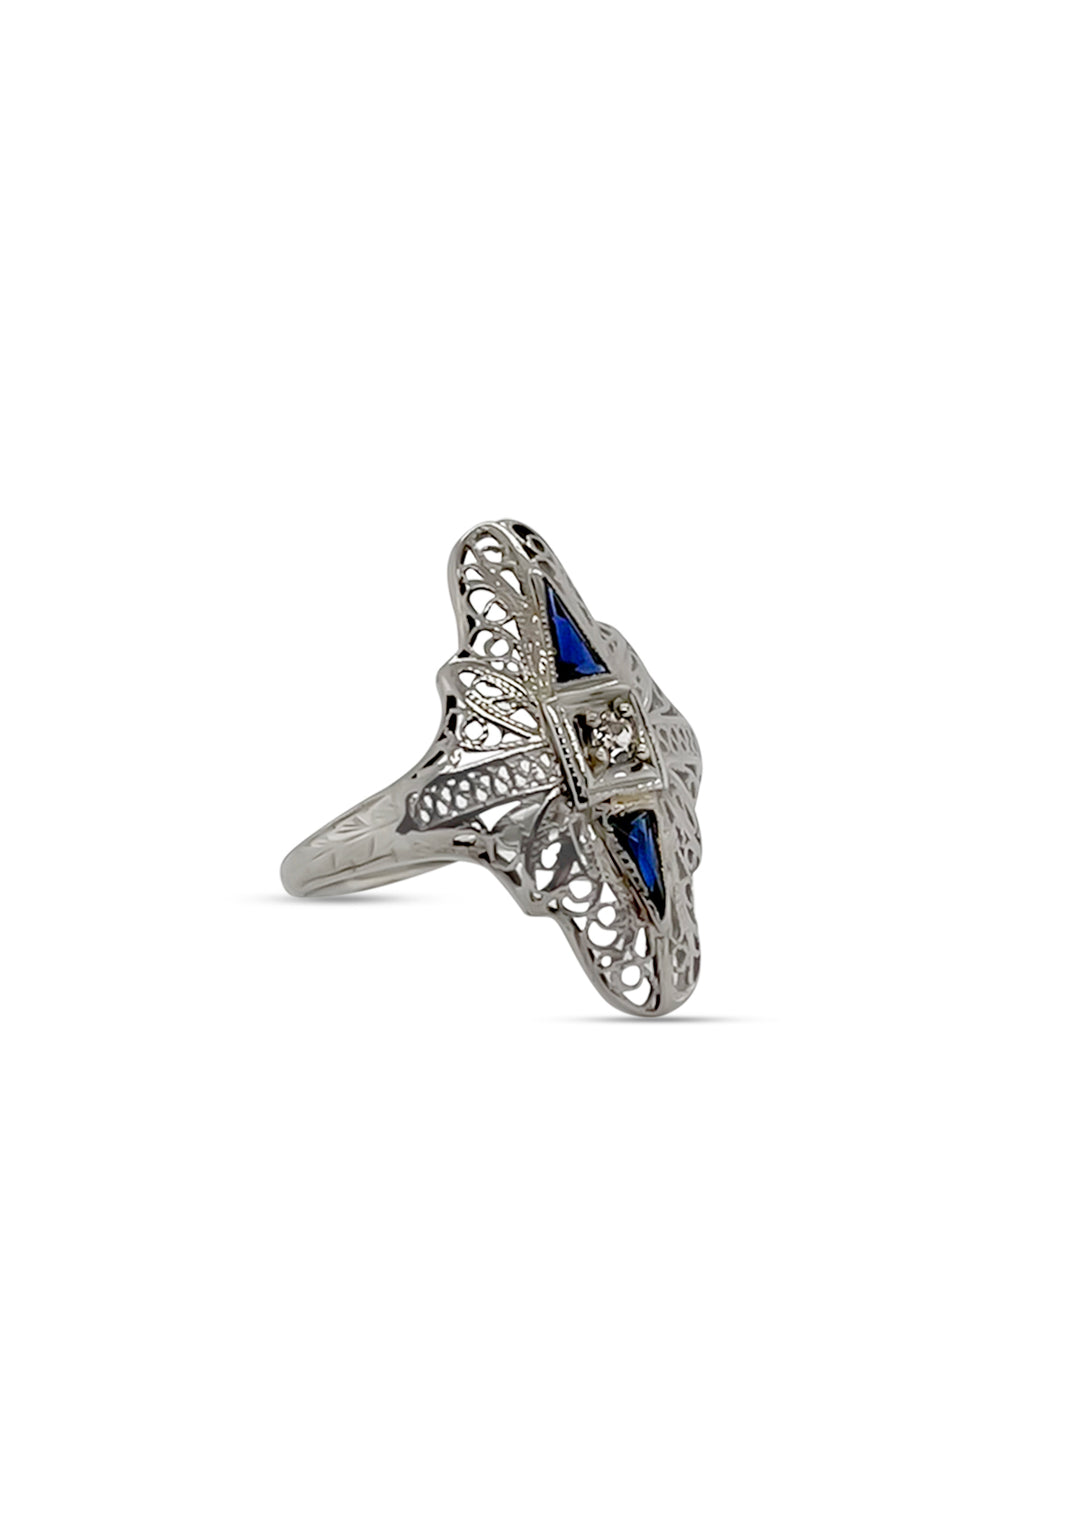 14K White Gold Art Deco Synthetic Blue Spinel And Diamond Shield Ring